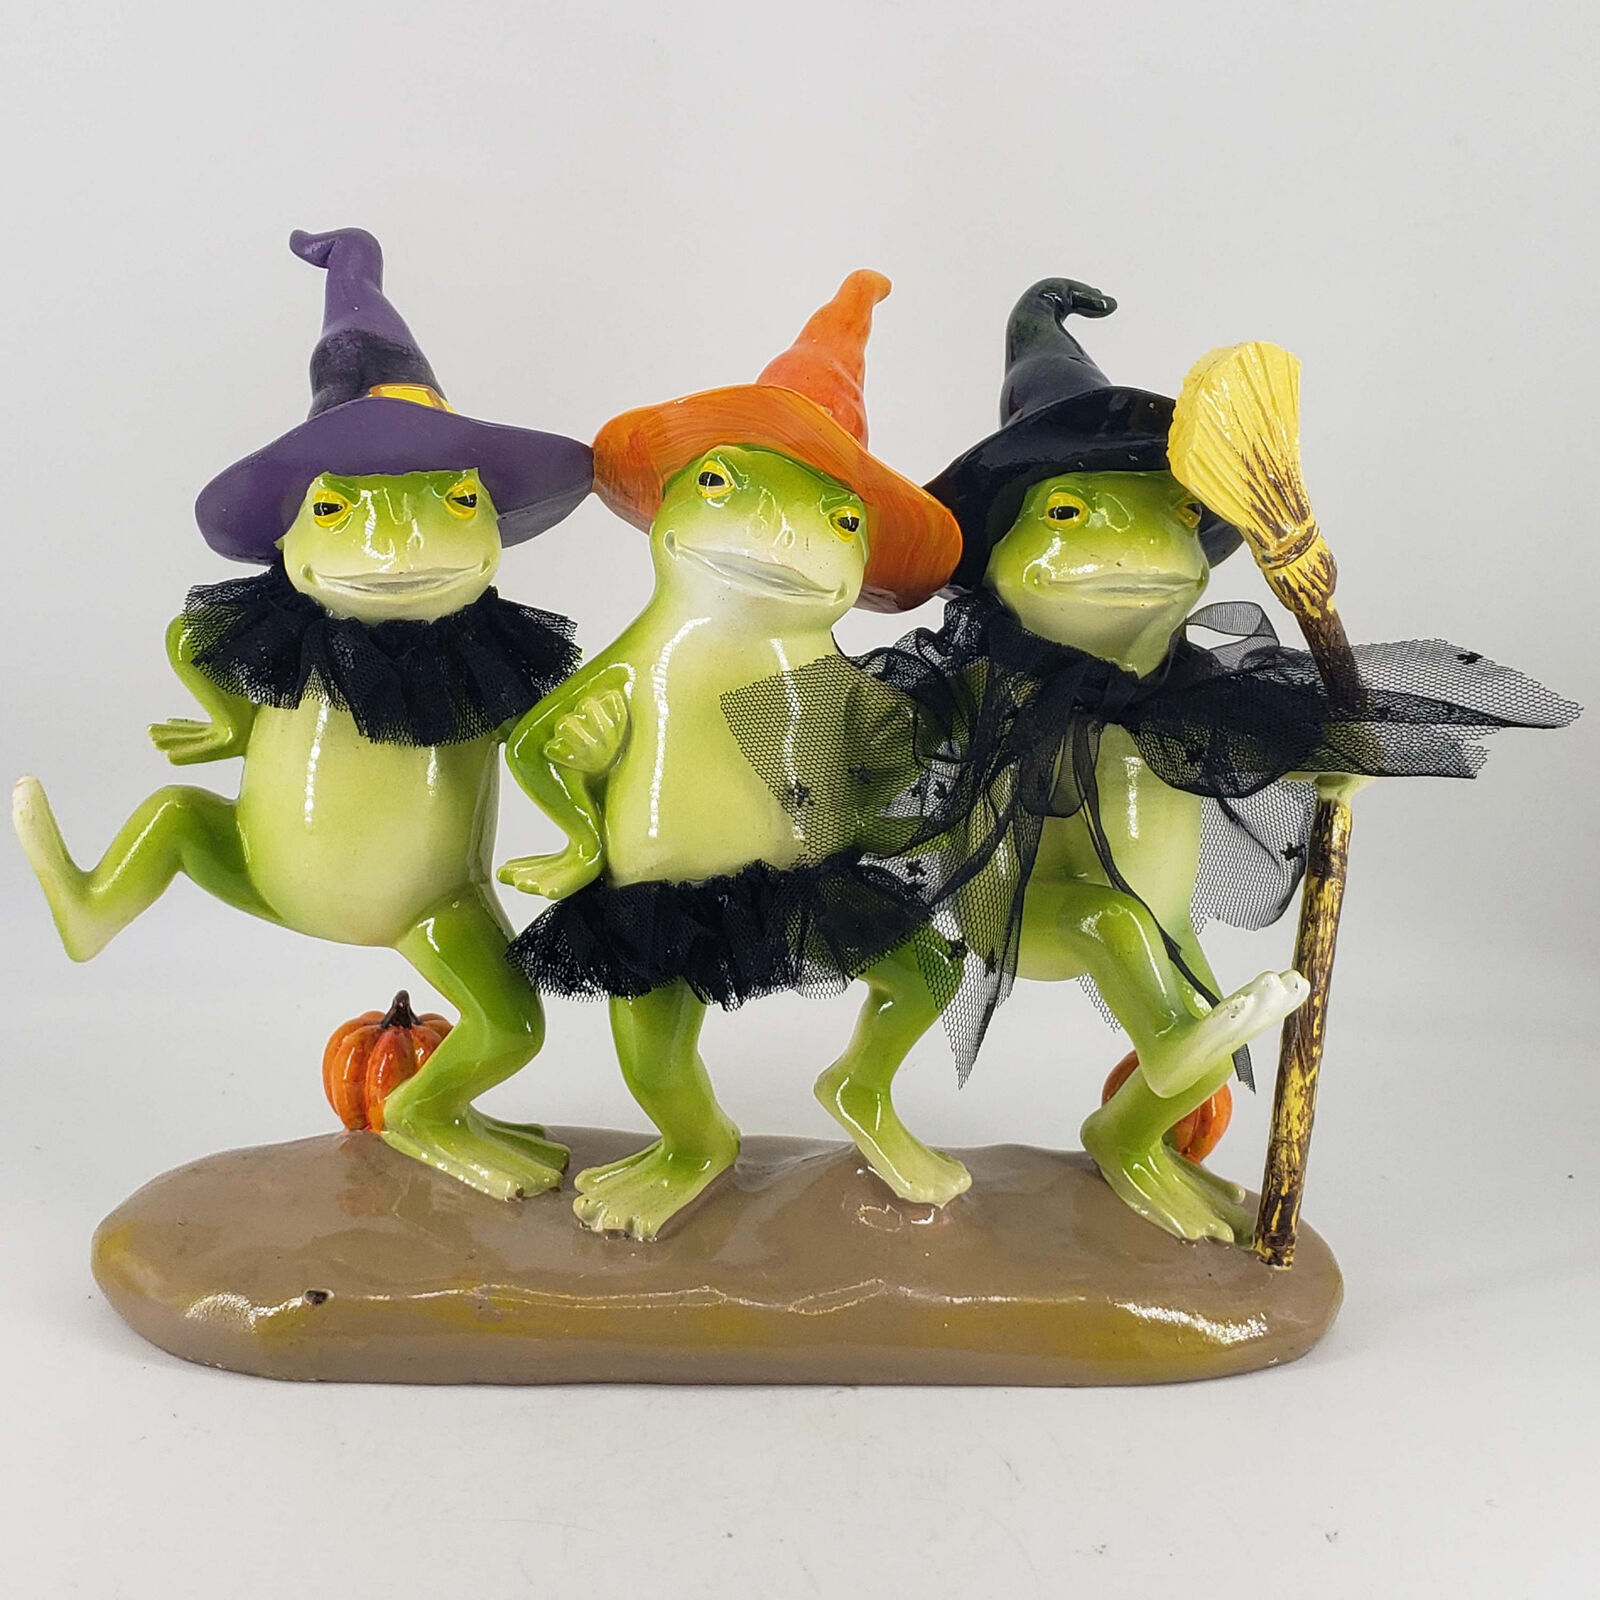 Halloween Decor 3 Frogs in Witch Hats With Pumpkins and Broom Statue